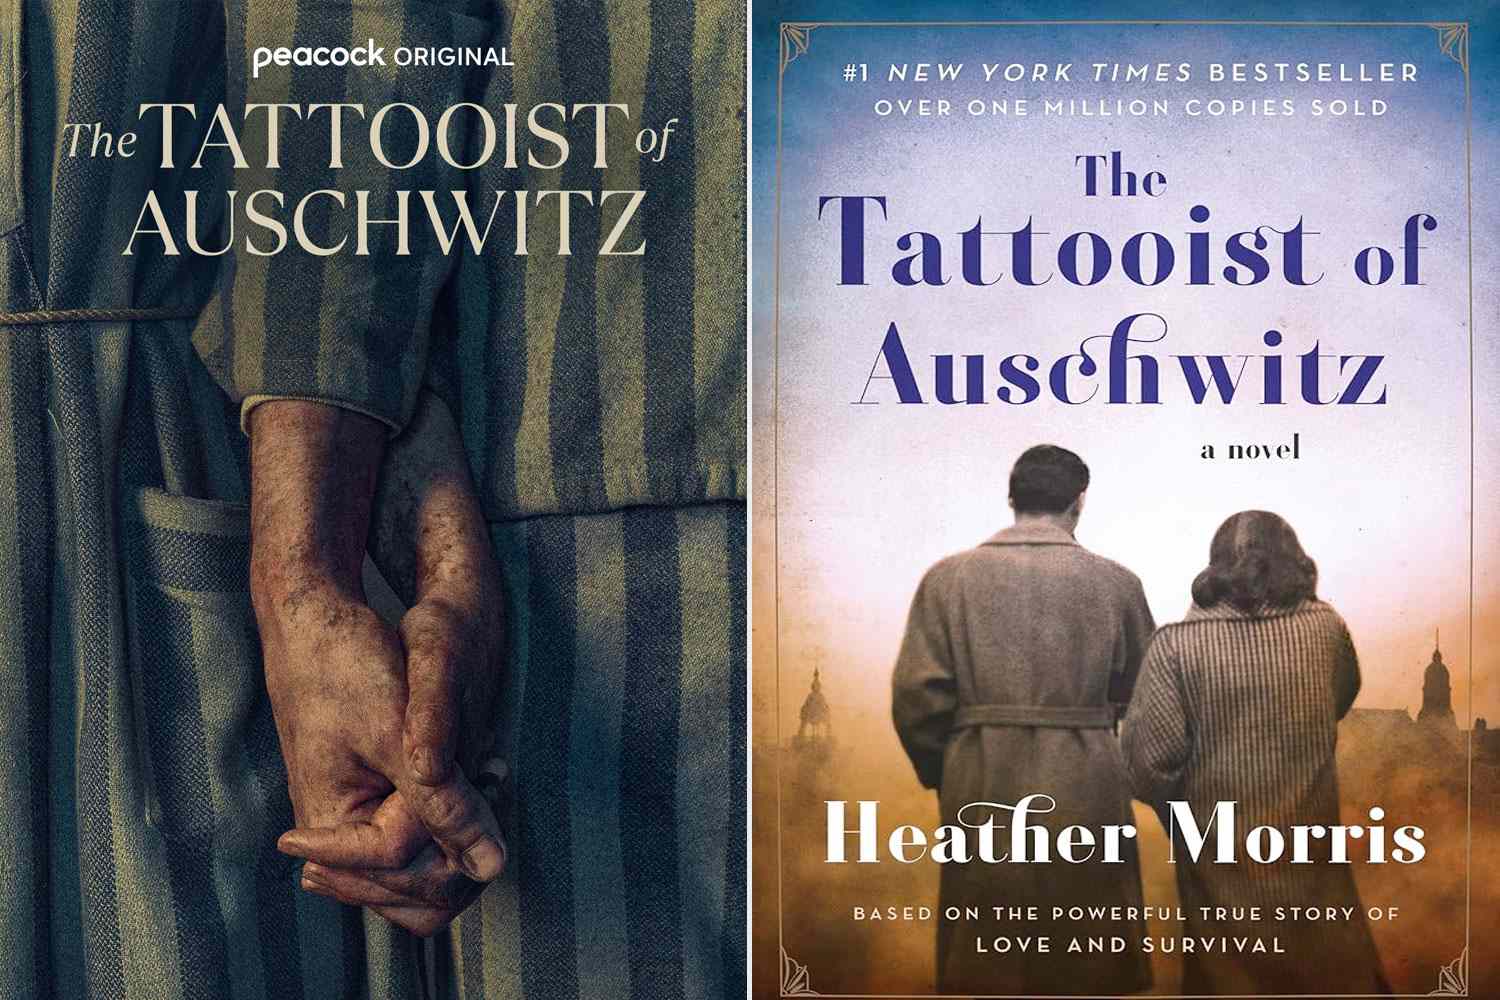 Let's Break Down the “Tattooist of Auschwitz” Book and TV Series: See the Differences